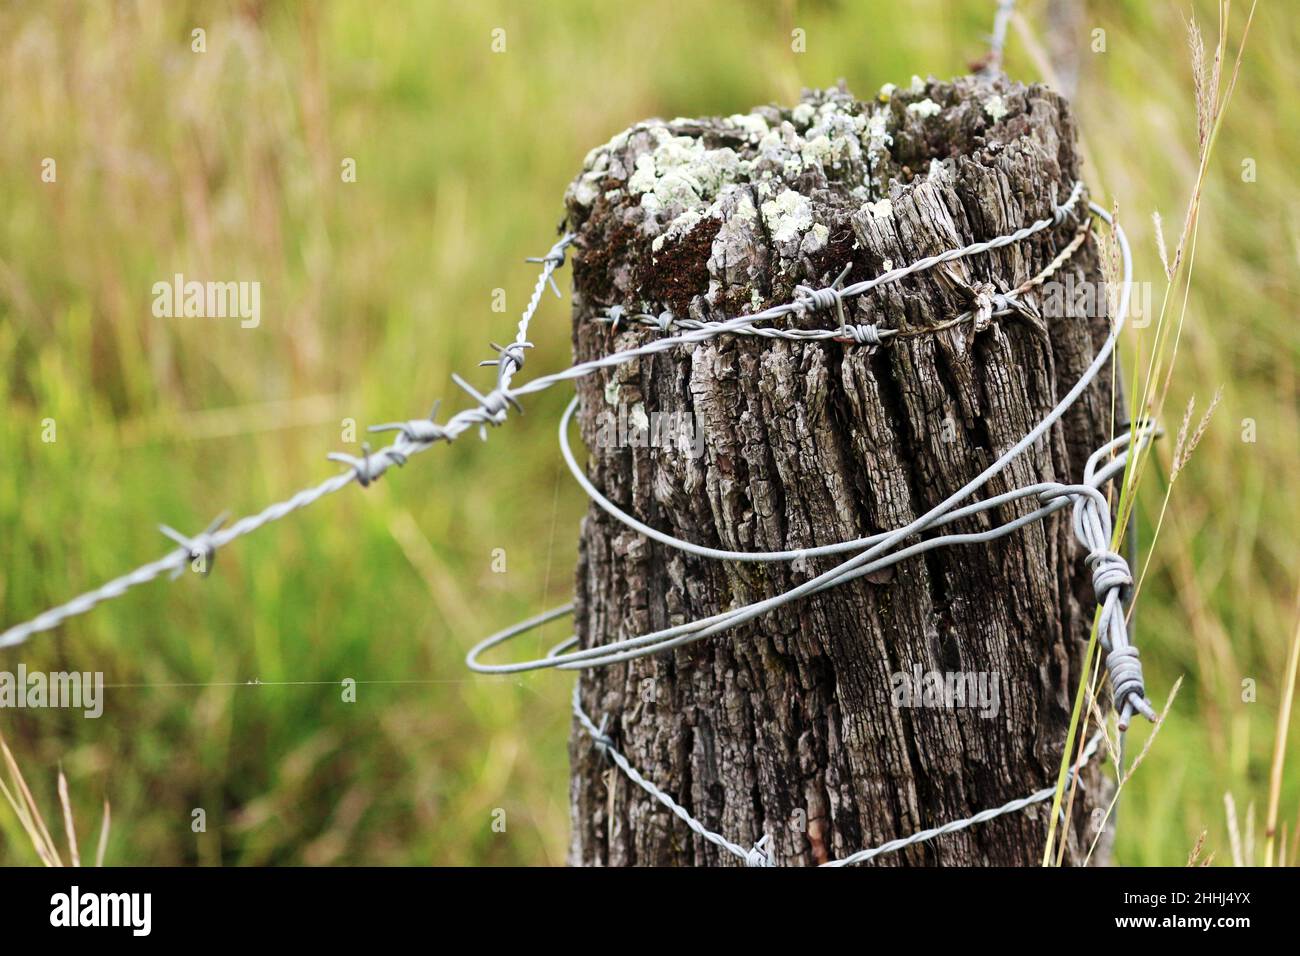 In the simplicity of life in the interior, the boundaries of land are demarcated by logs and barbed wire and have been there for a long time. Stock Photo